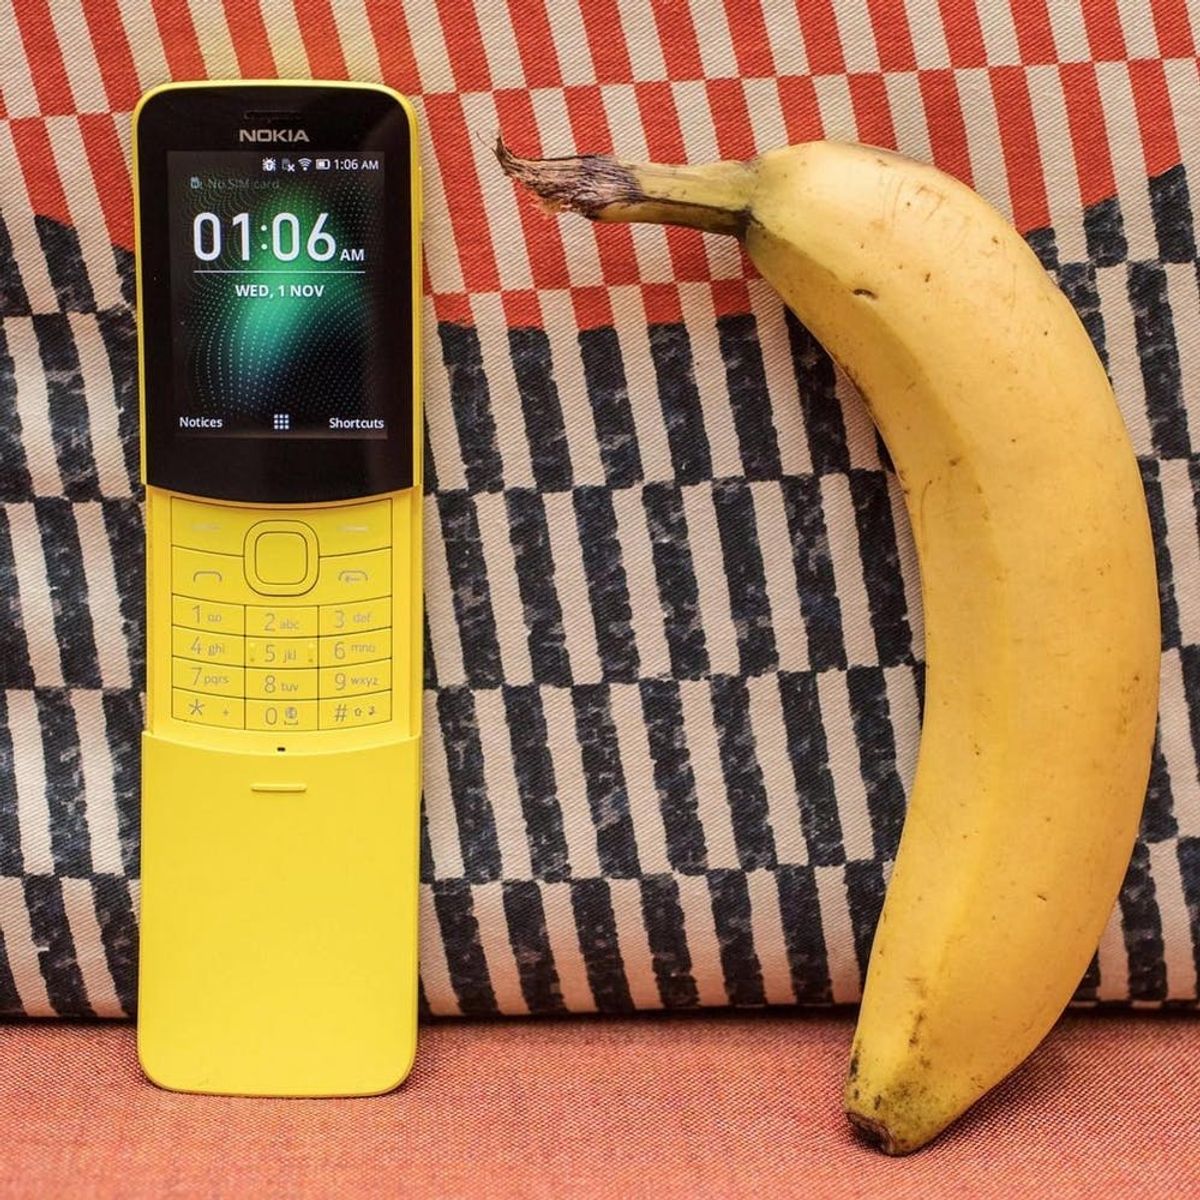 Hey ‘90s Kids, the Nokia Banana Phone Is Back and It’s Totally Affordable